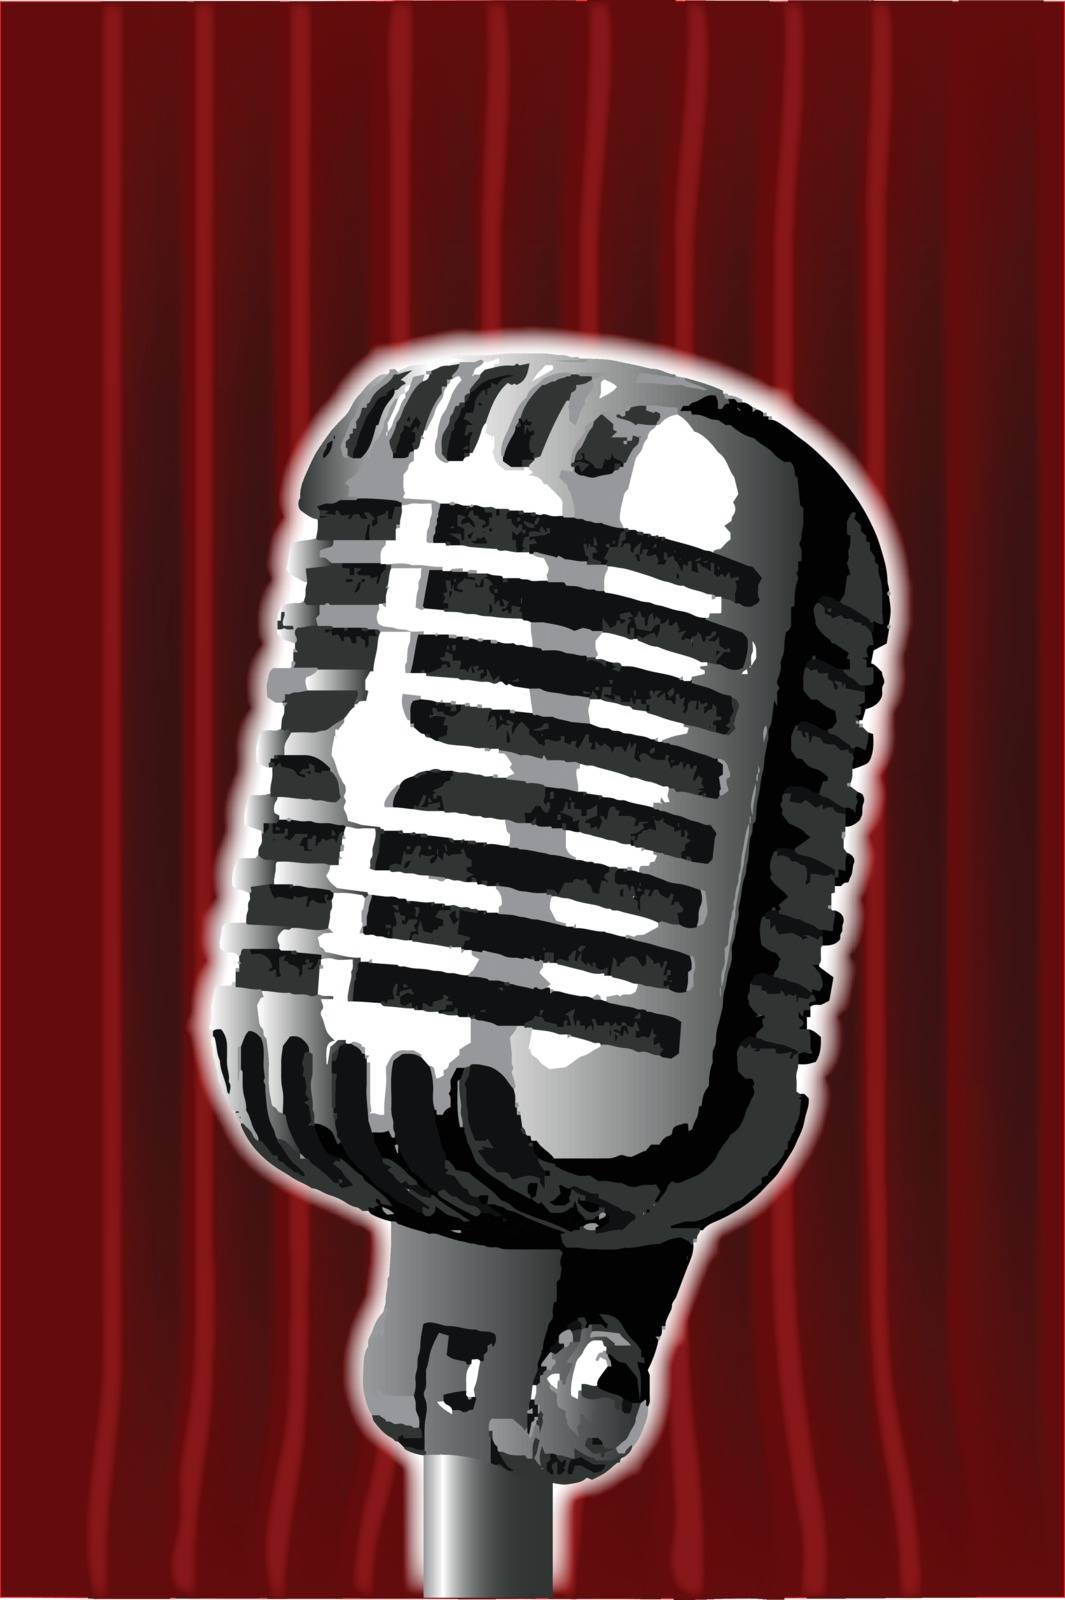 A microphone ready on stage against a red curtain.